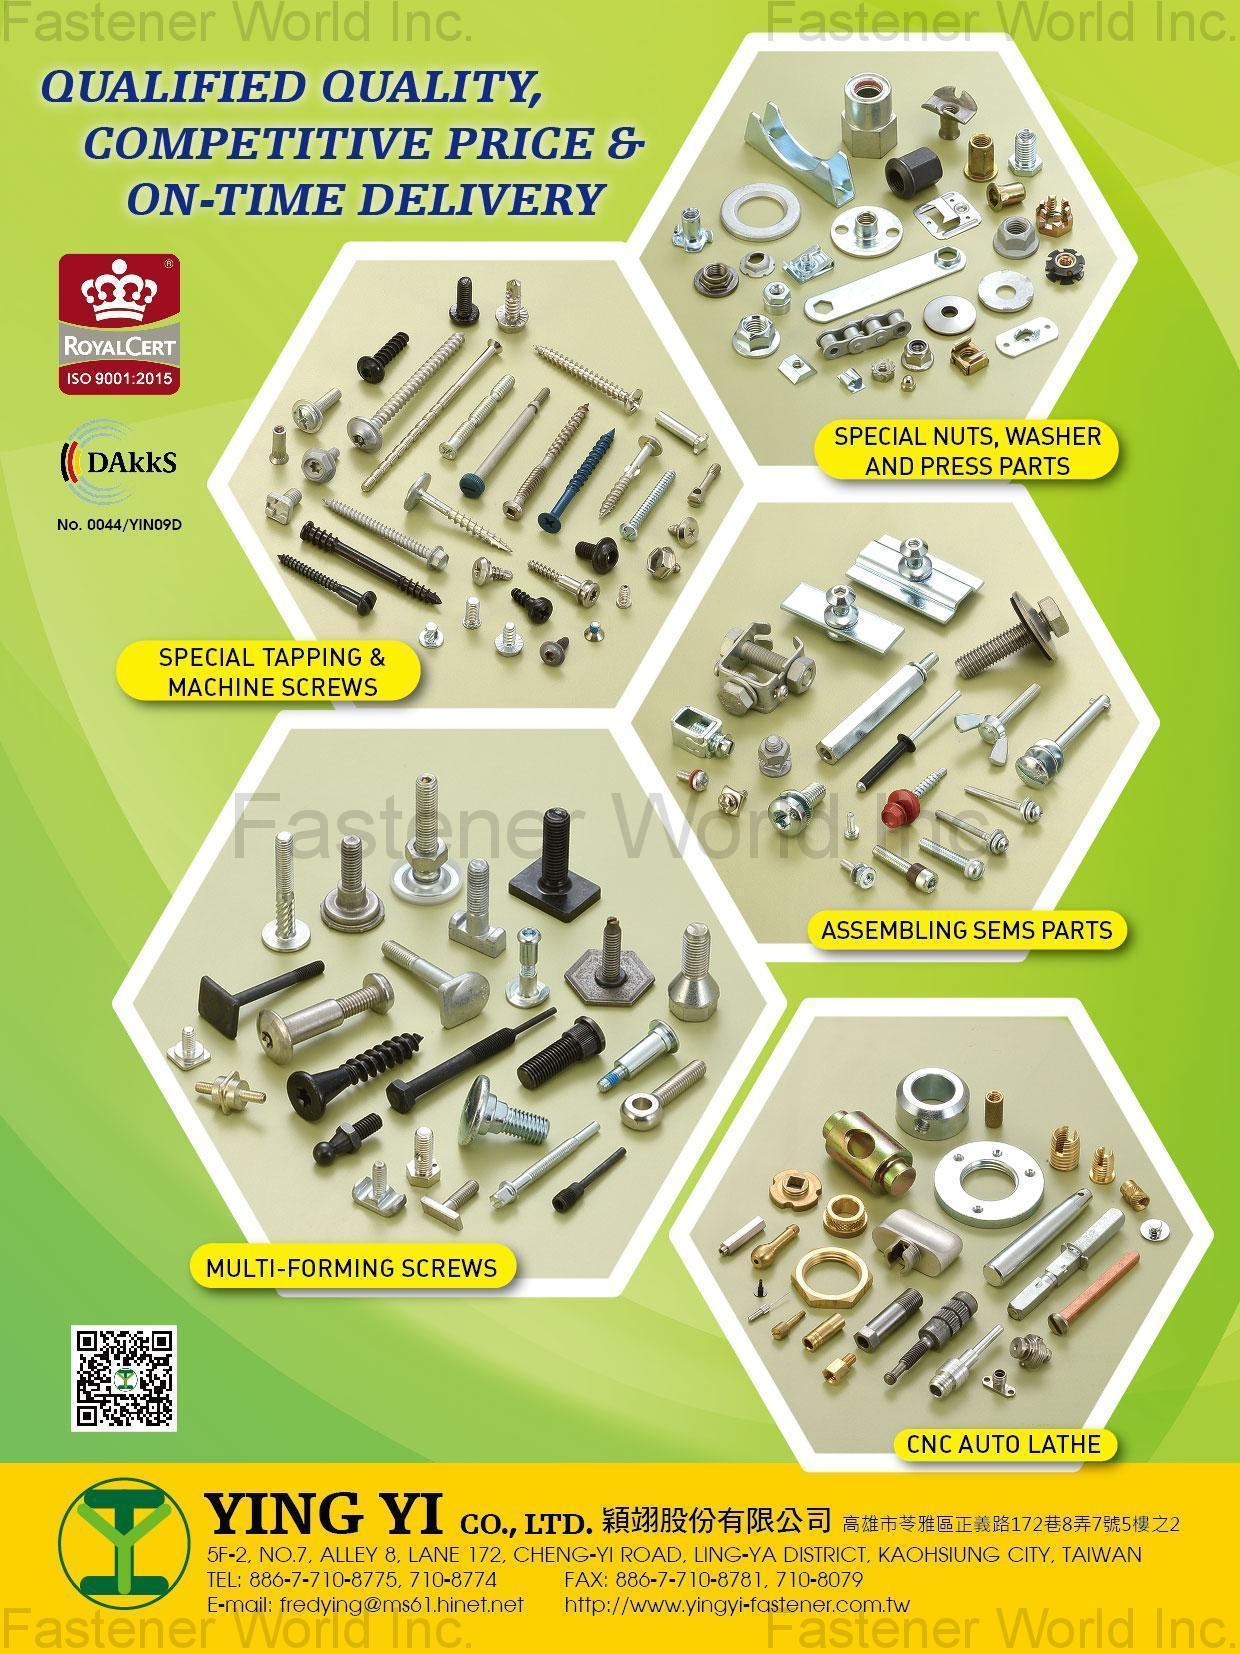 YING YI CO., LTD. , Special Tapping & Machine Screws, Special Nuts, Washer and Press Parts, Assembling SEMS Parts, Multi-Forming Screws, CNC Auto Lathe , Special Screws